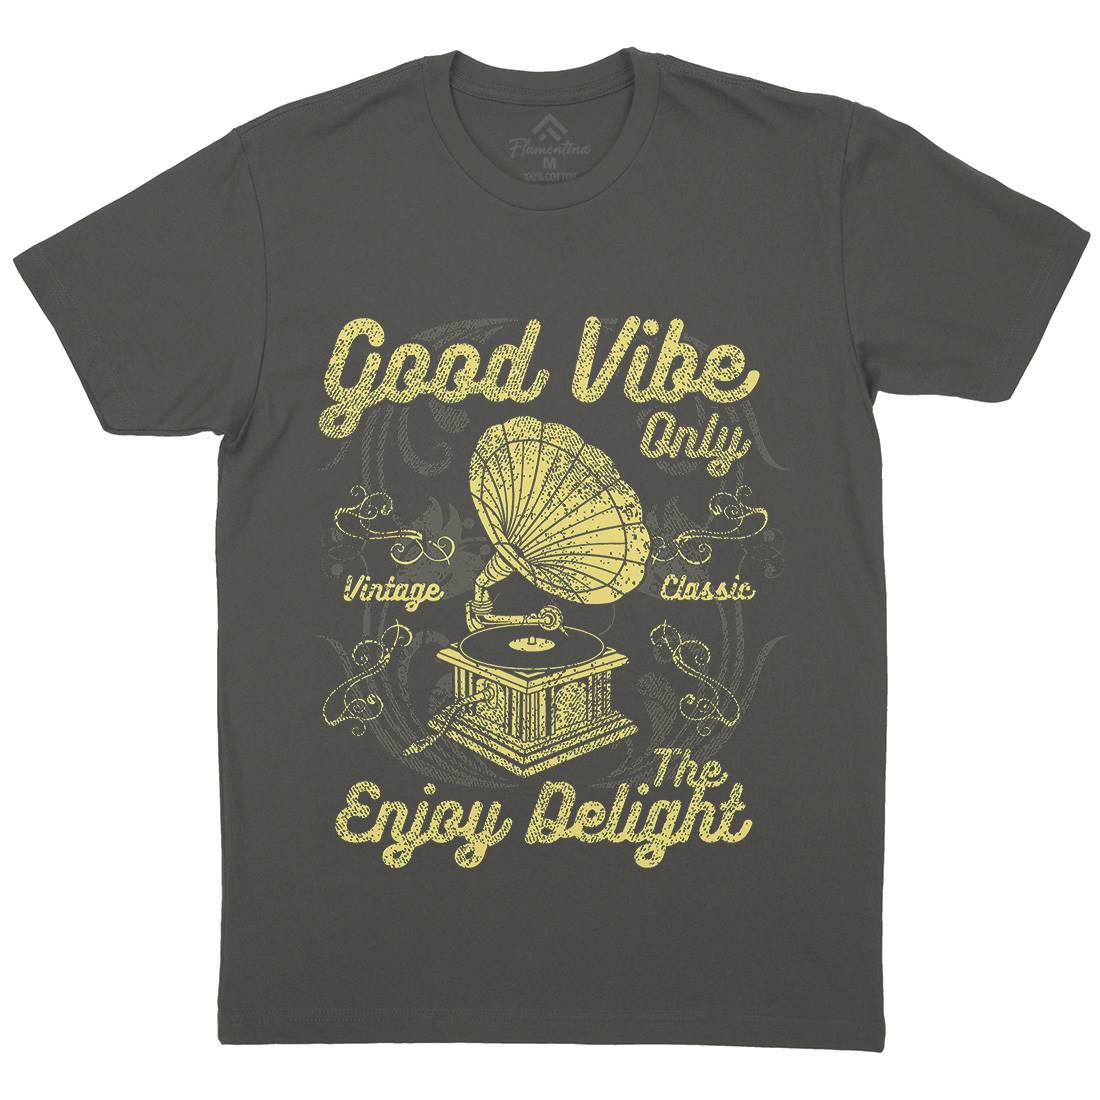 Good Vibe Only Mens Crew Neck T-Shirt Music A059